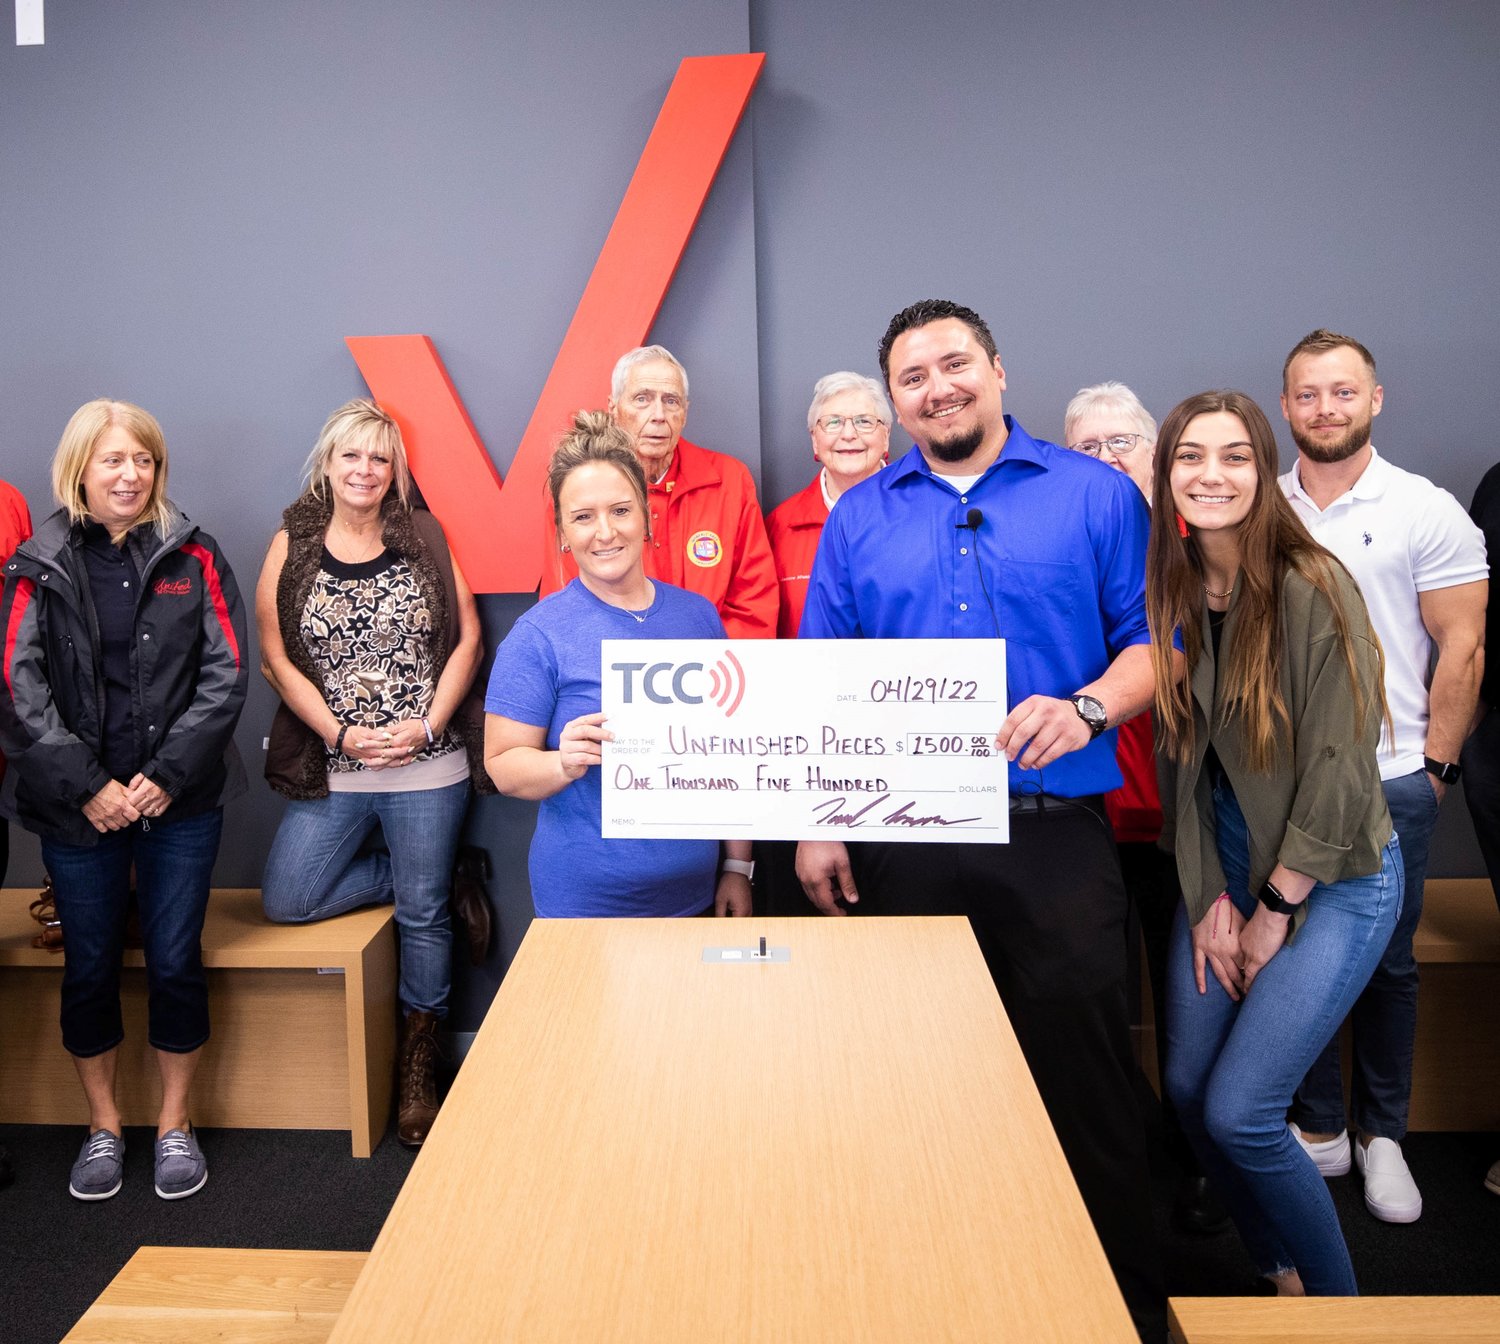 Moberly's local Verizon store donates $1,500 from TCC to Unfinish3d Pieces, a Moberly non-profit organization dedicated to increasing autism awareness. The store held its grand opening and ribbon-cutting last month.